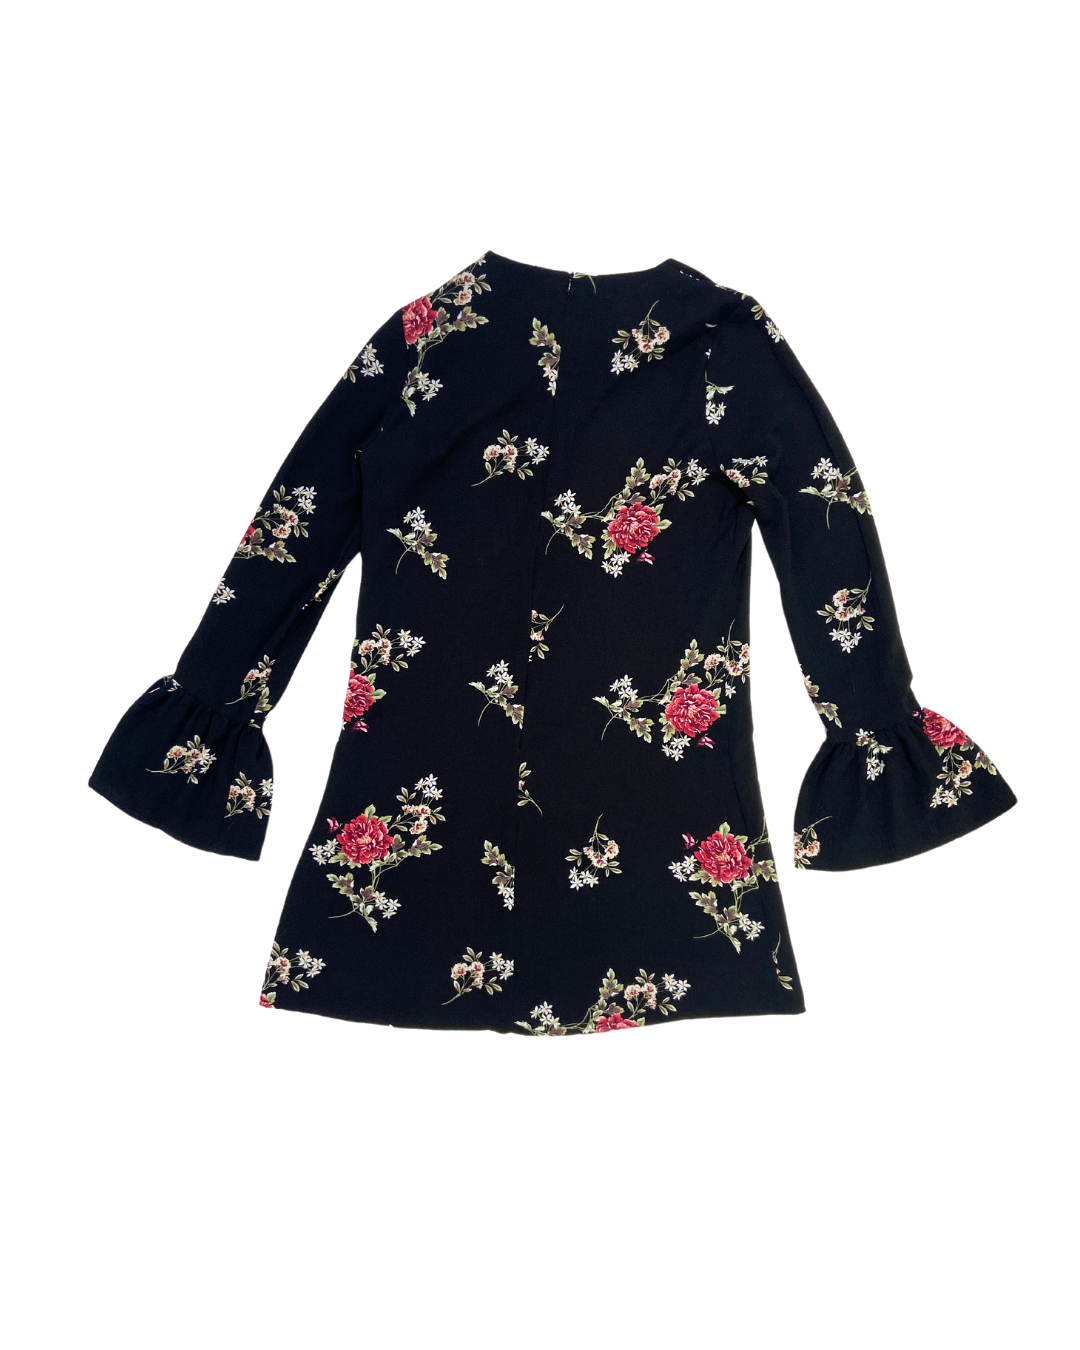 Missguided Floral Bell Sleeve Dress